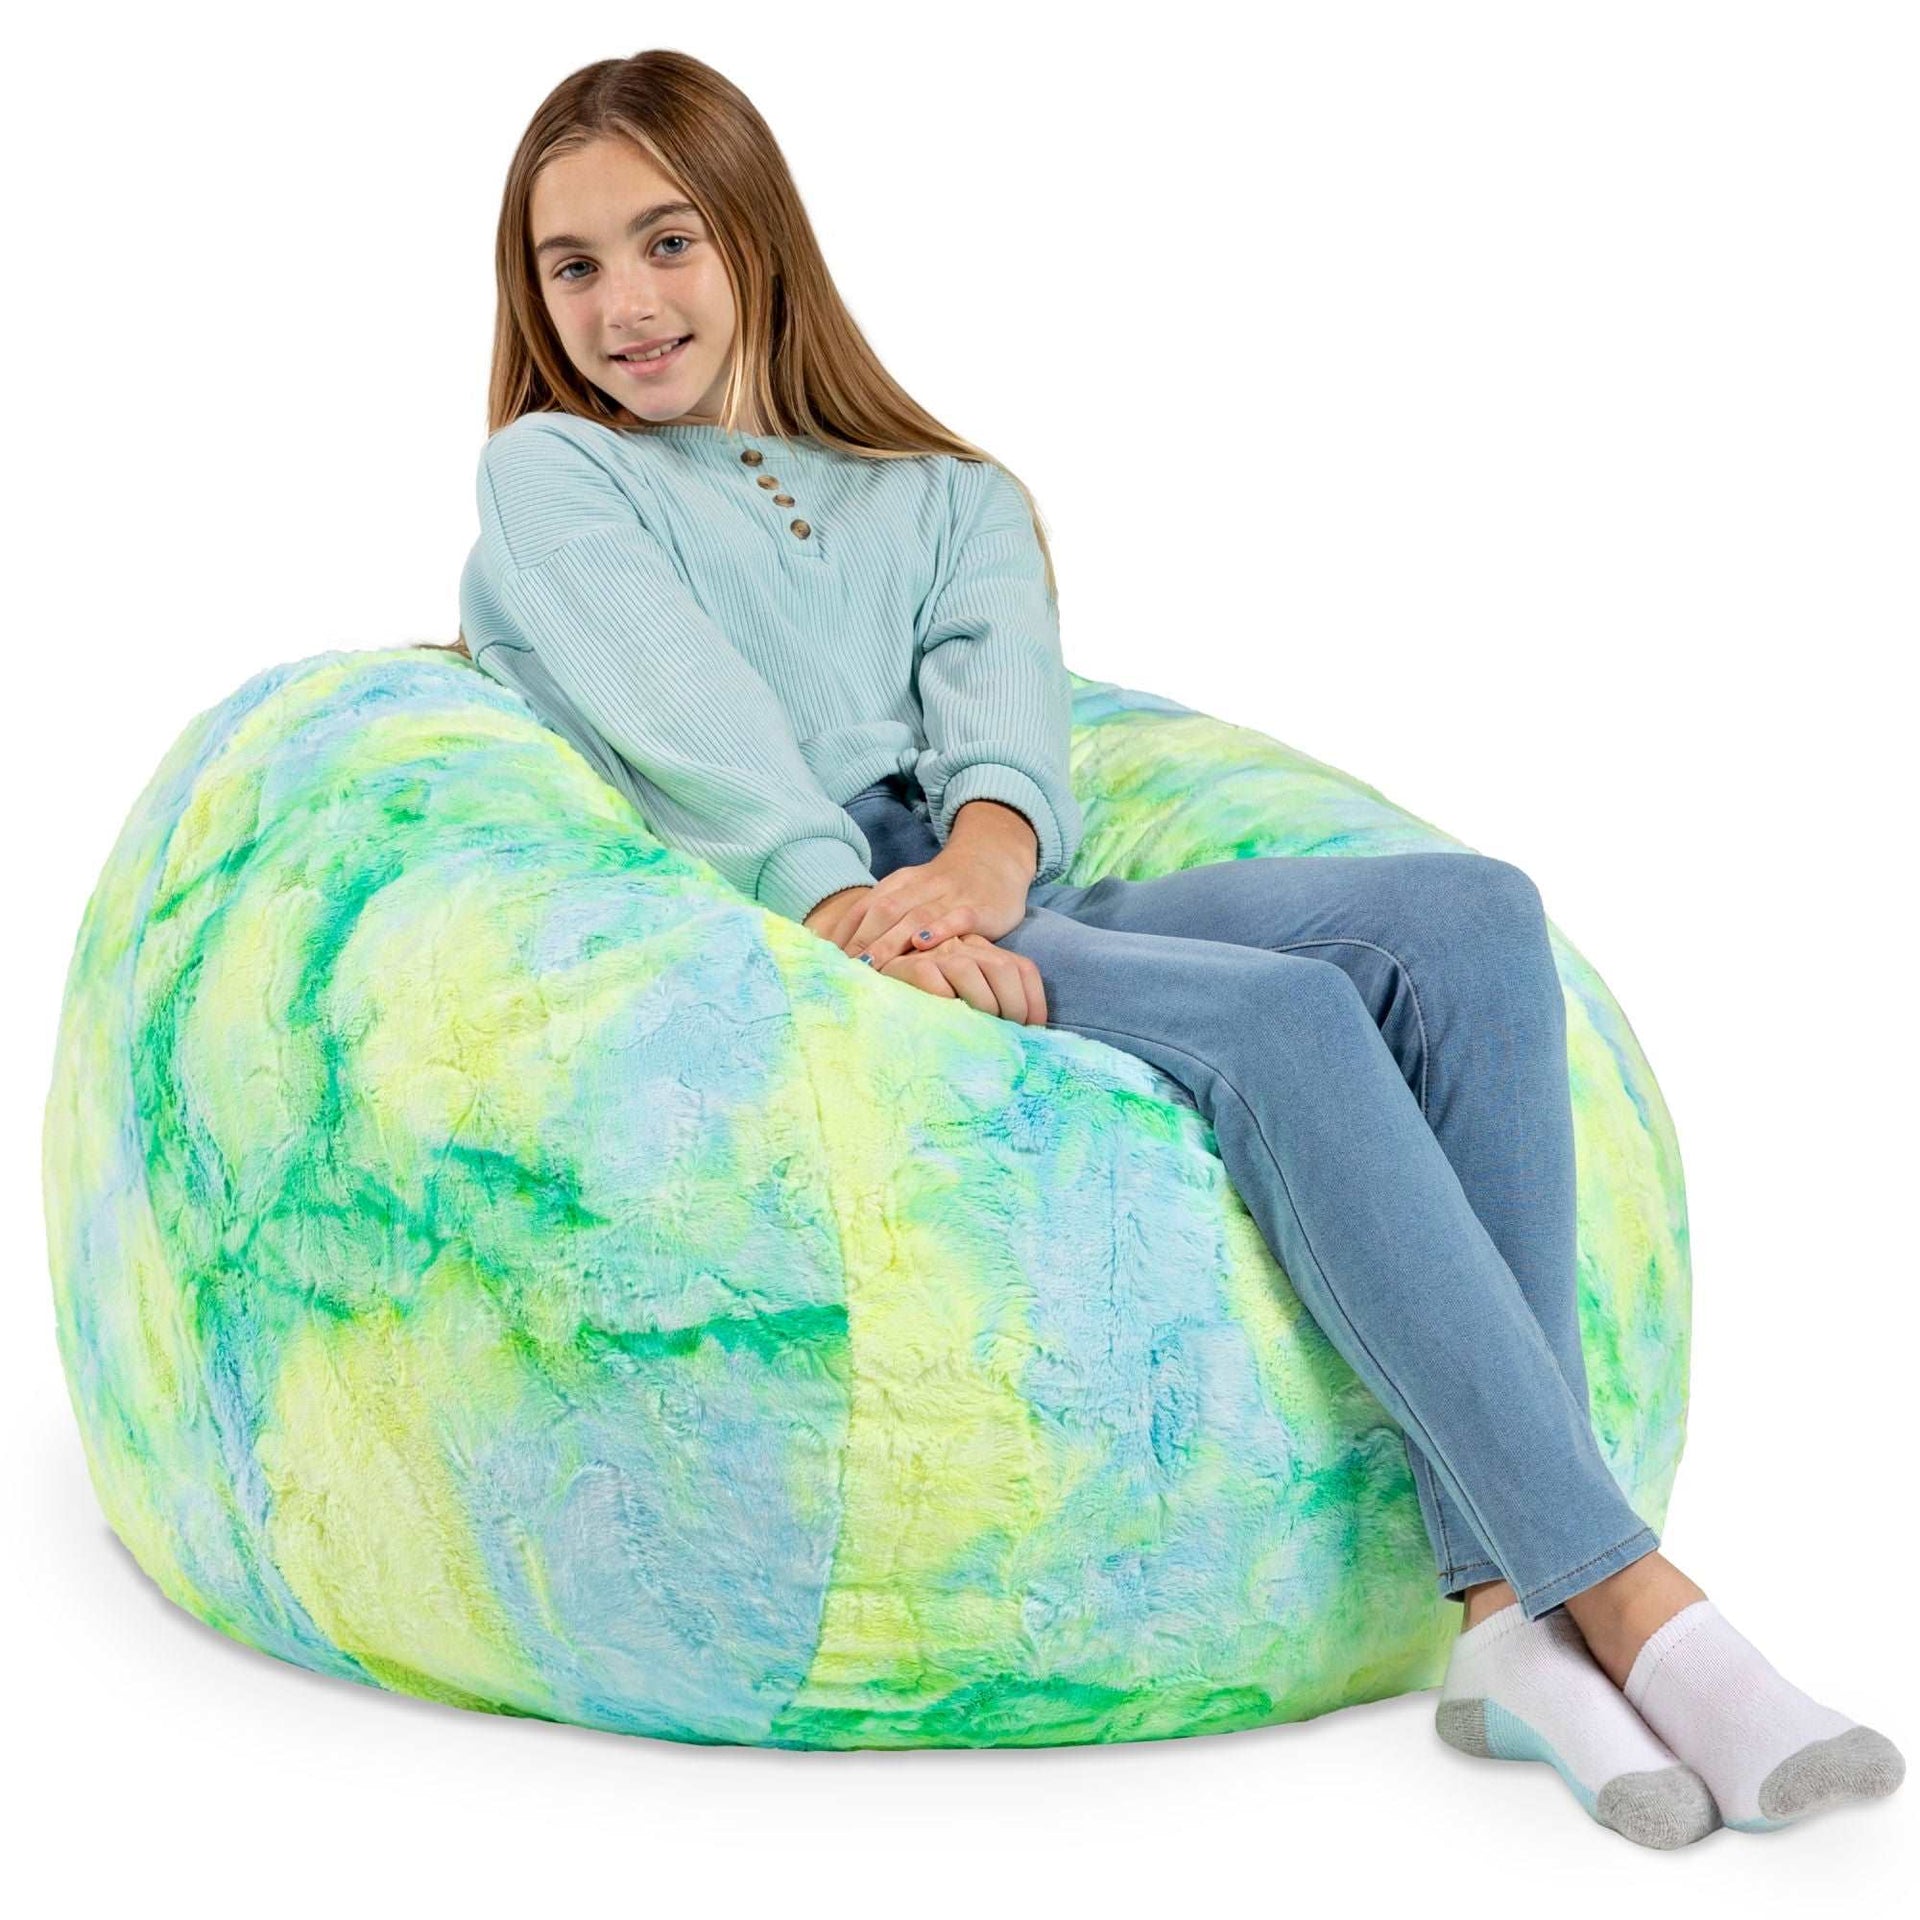 Nfin8 Whimsy Nest - 3 Foot Bean Bag Chair in Faux Fur Firefly